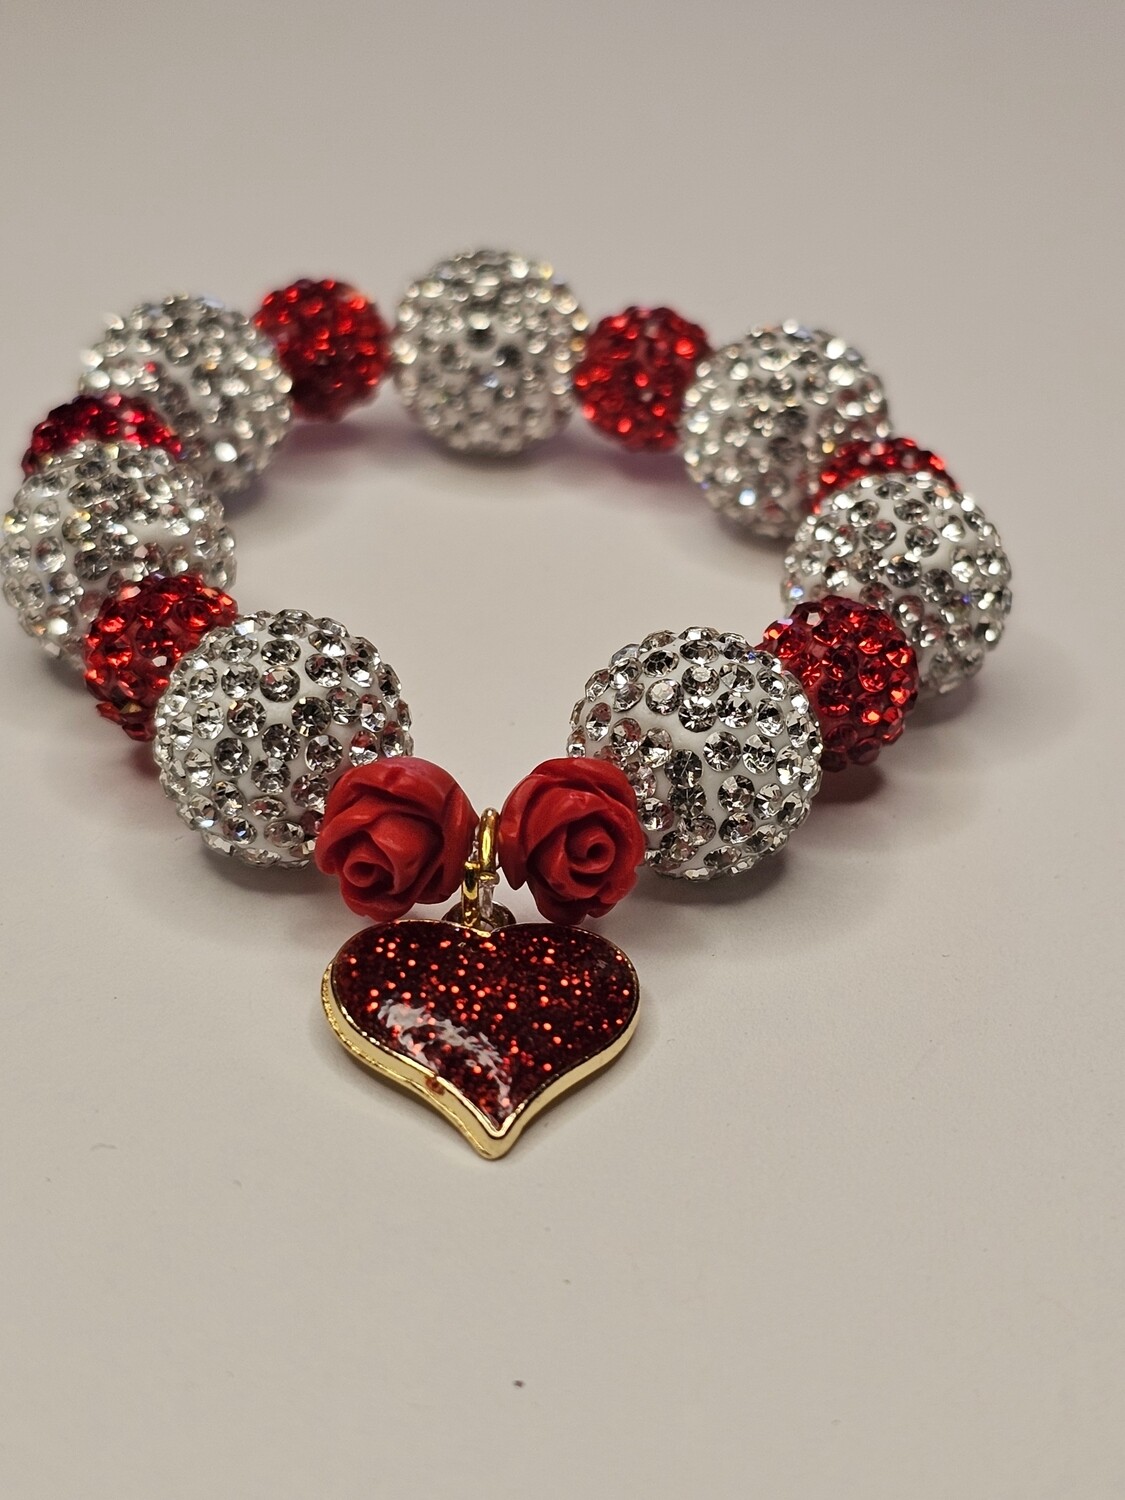 Handcrafted exclusively designed bracelets using high-quality beads and charms from Tru Treasures. Valentine's Day Edition. 